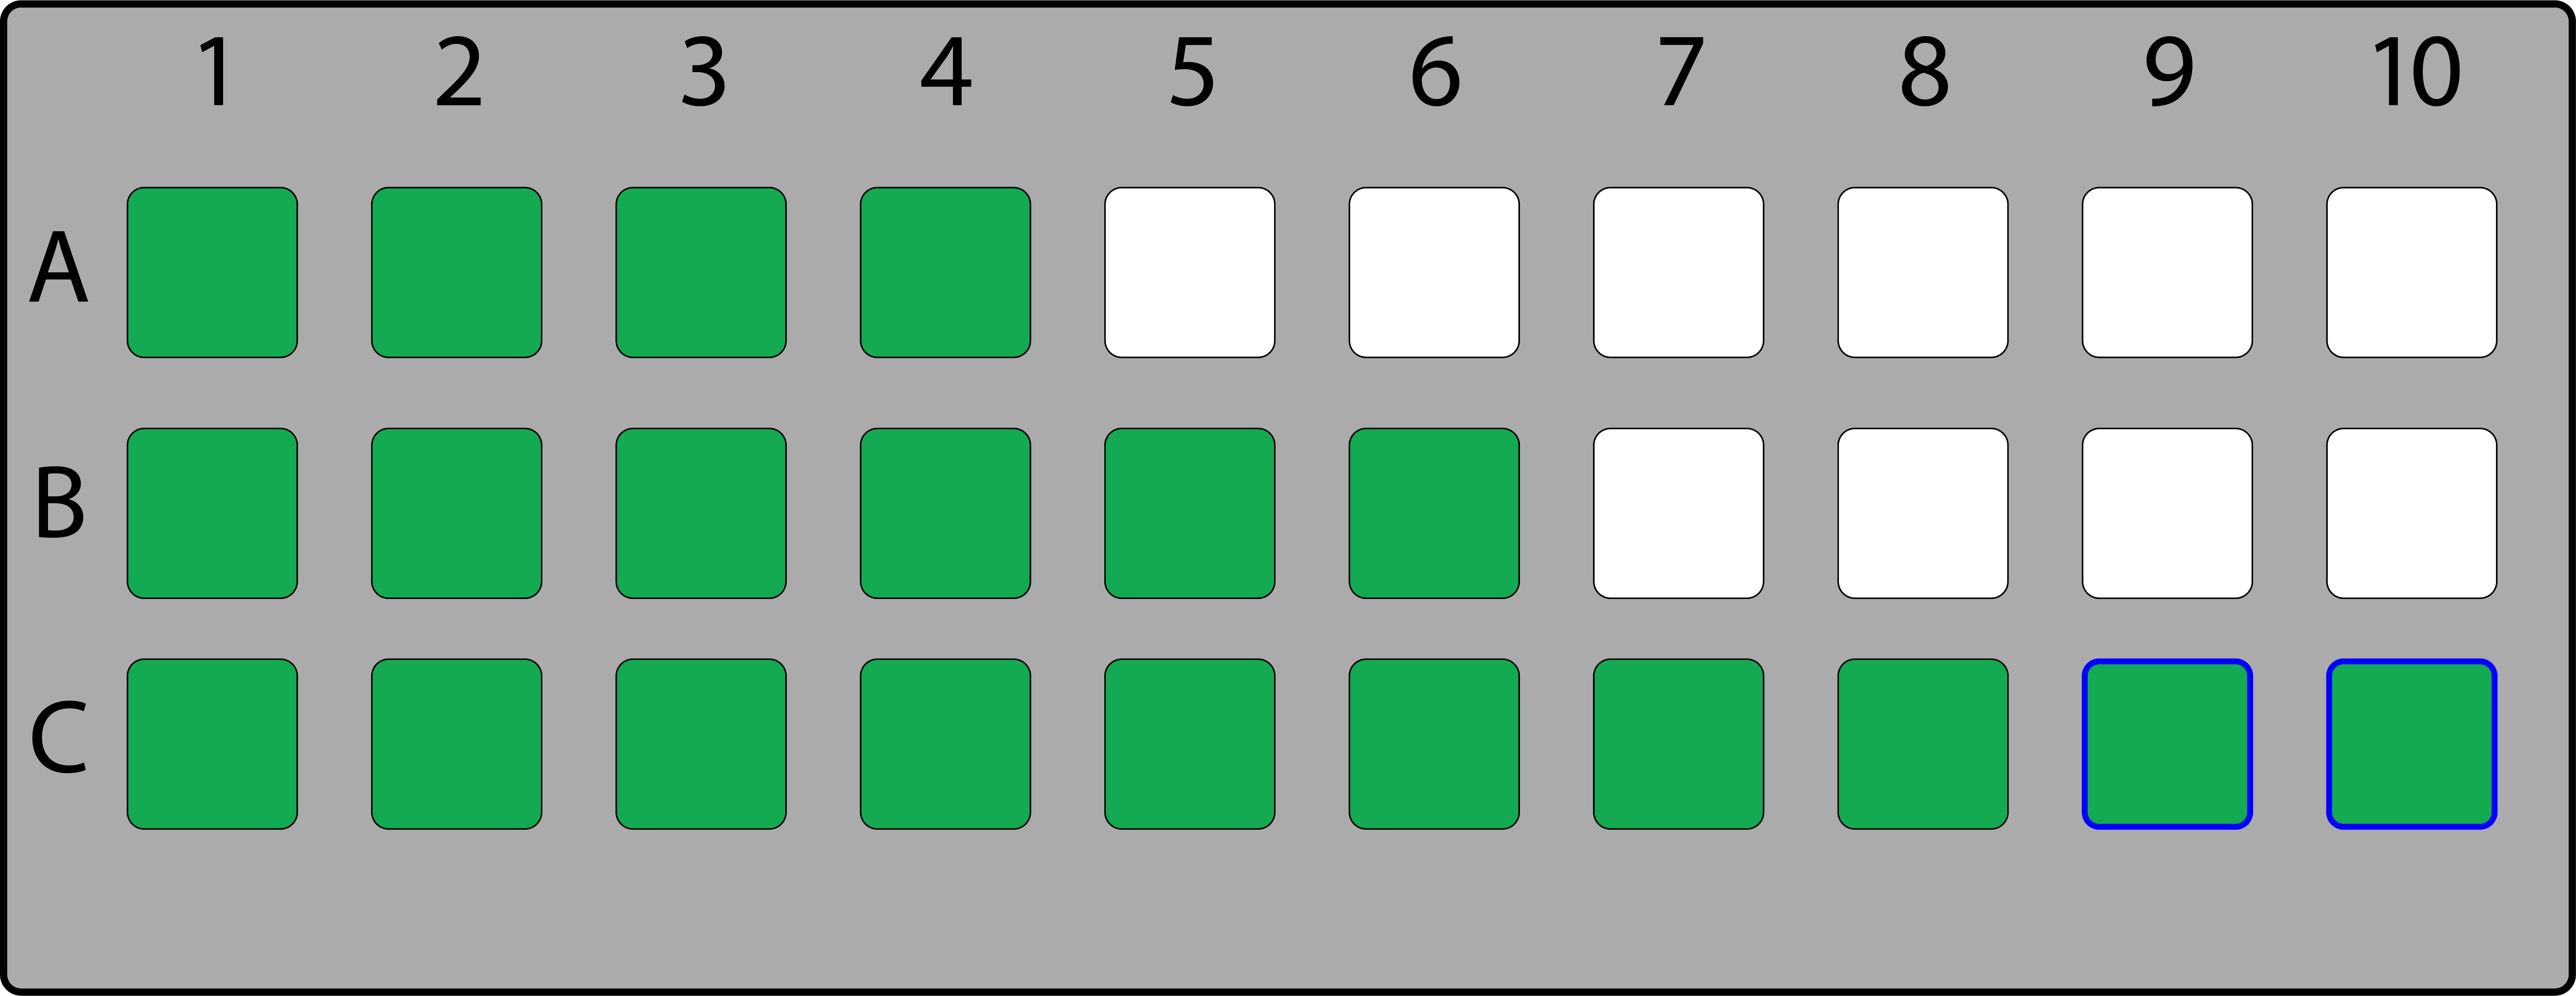 One-dimensional seating map